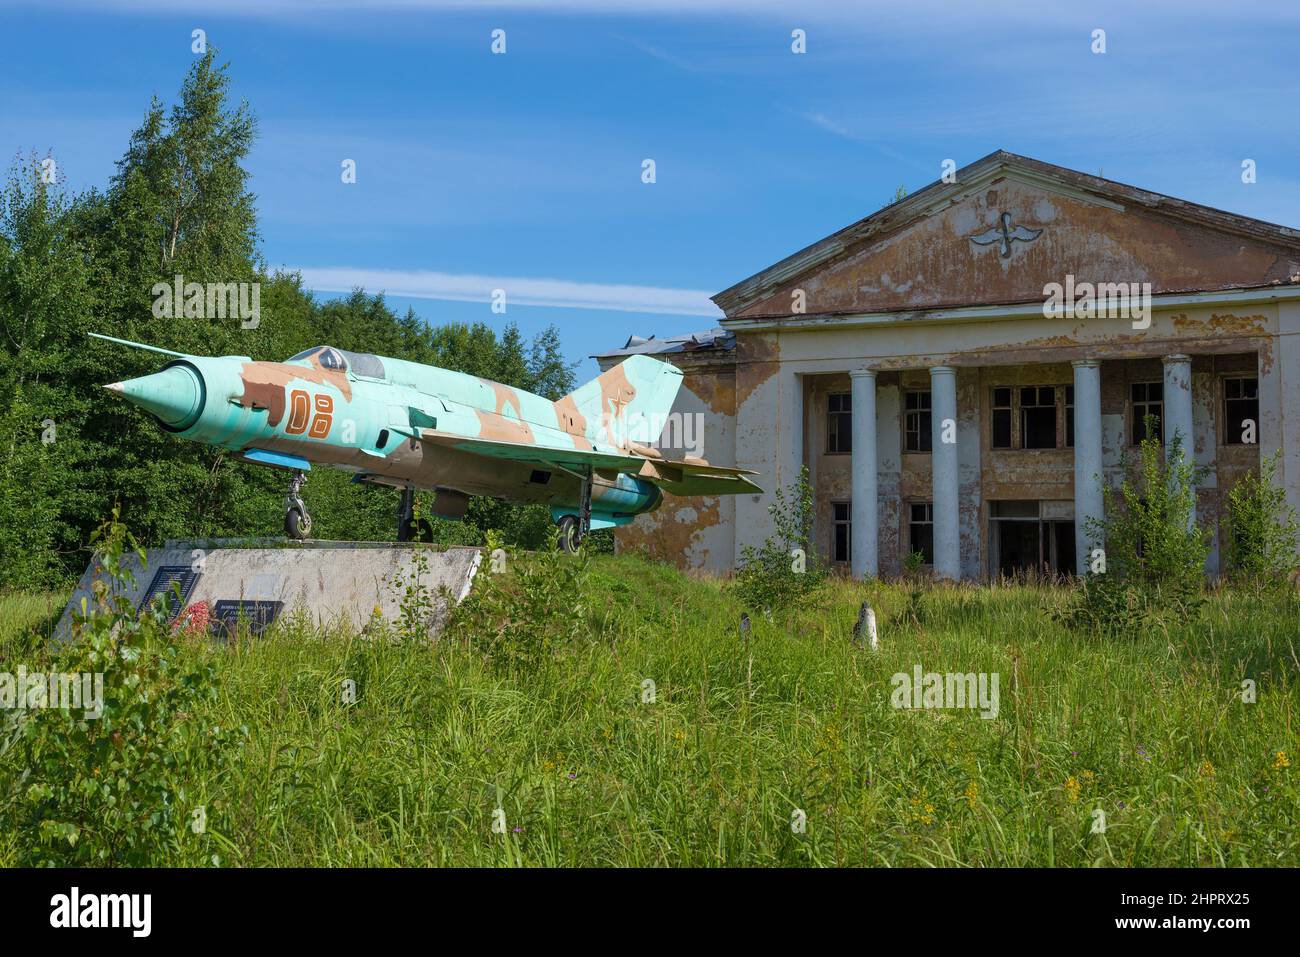 PSKOV REGION, RUSSIA - JULY 19, 2020: MiG-21 aircraft is a monument to military pilots near the building of the abandoned House of Culture. Territory Stock Photo